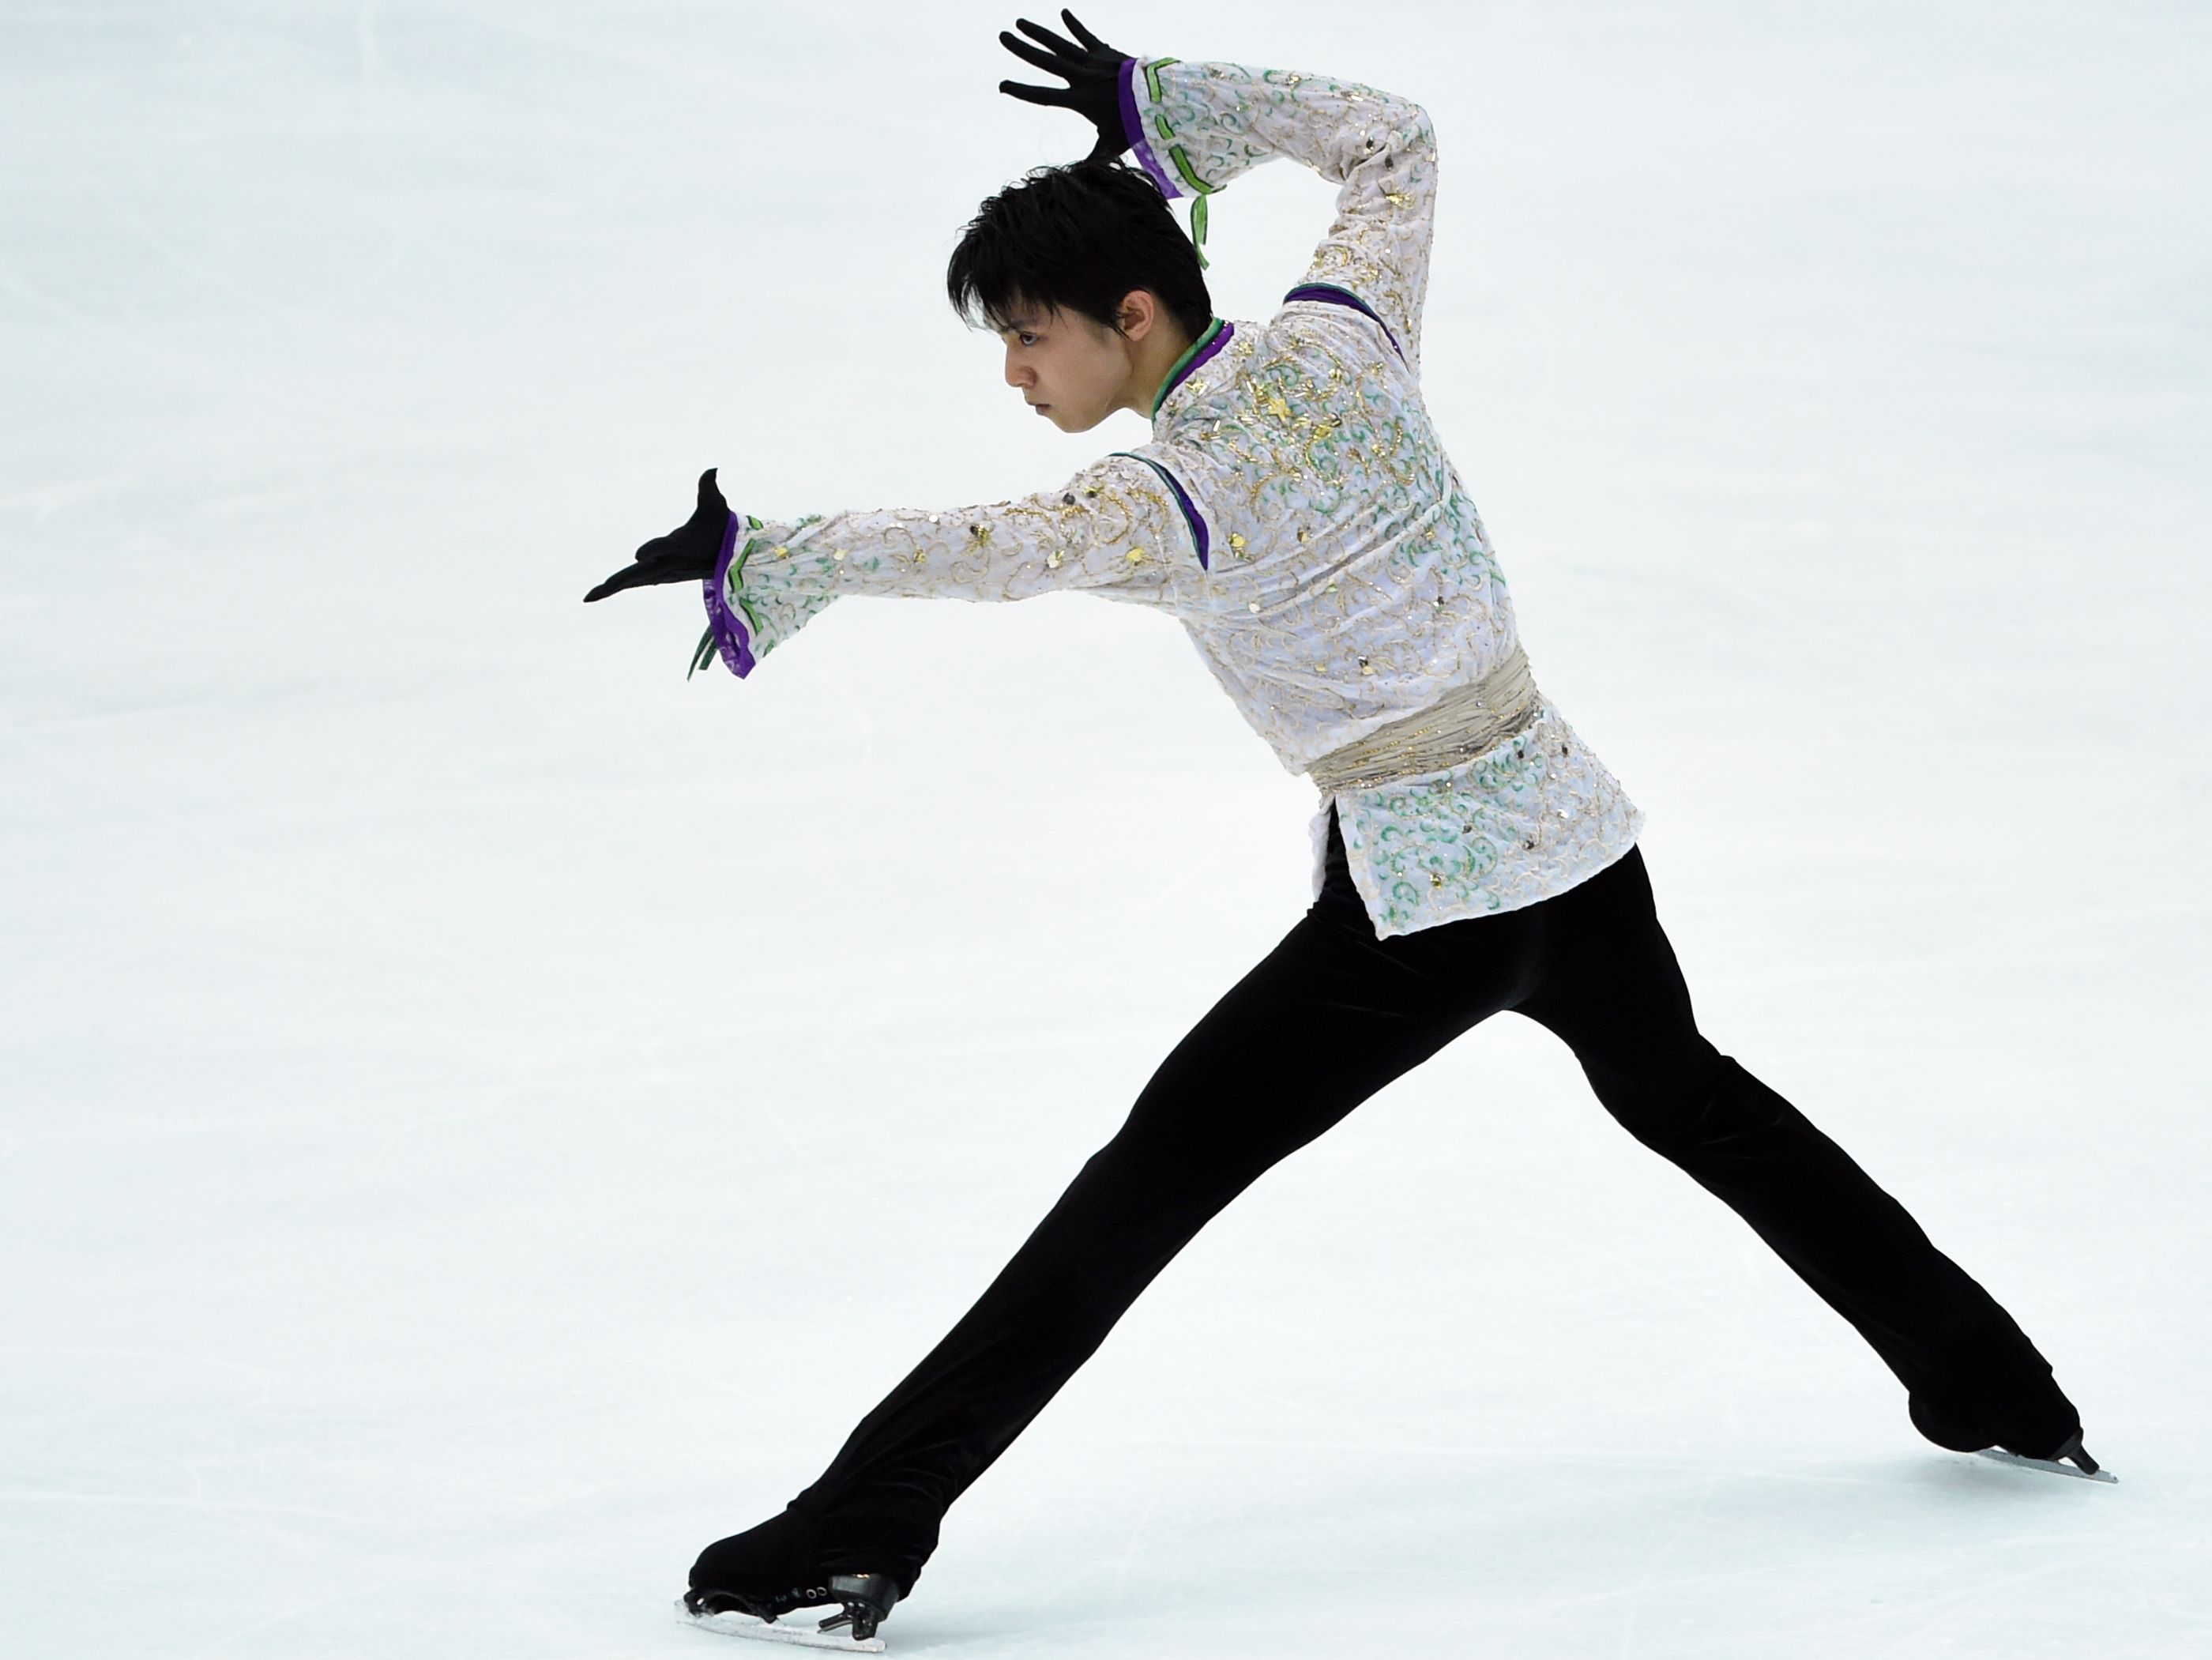 Yuzuru Hanyu performs during the men's free skate on Saturday at the NHK Trophy in Nagano. Hanyu captured the title with a world-record score of 322.40 points in the two-day competition. | AFP-JIJI